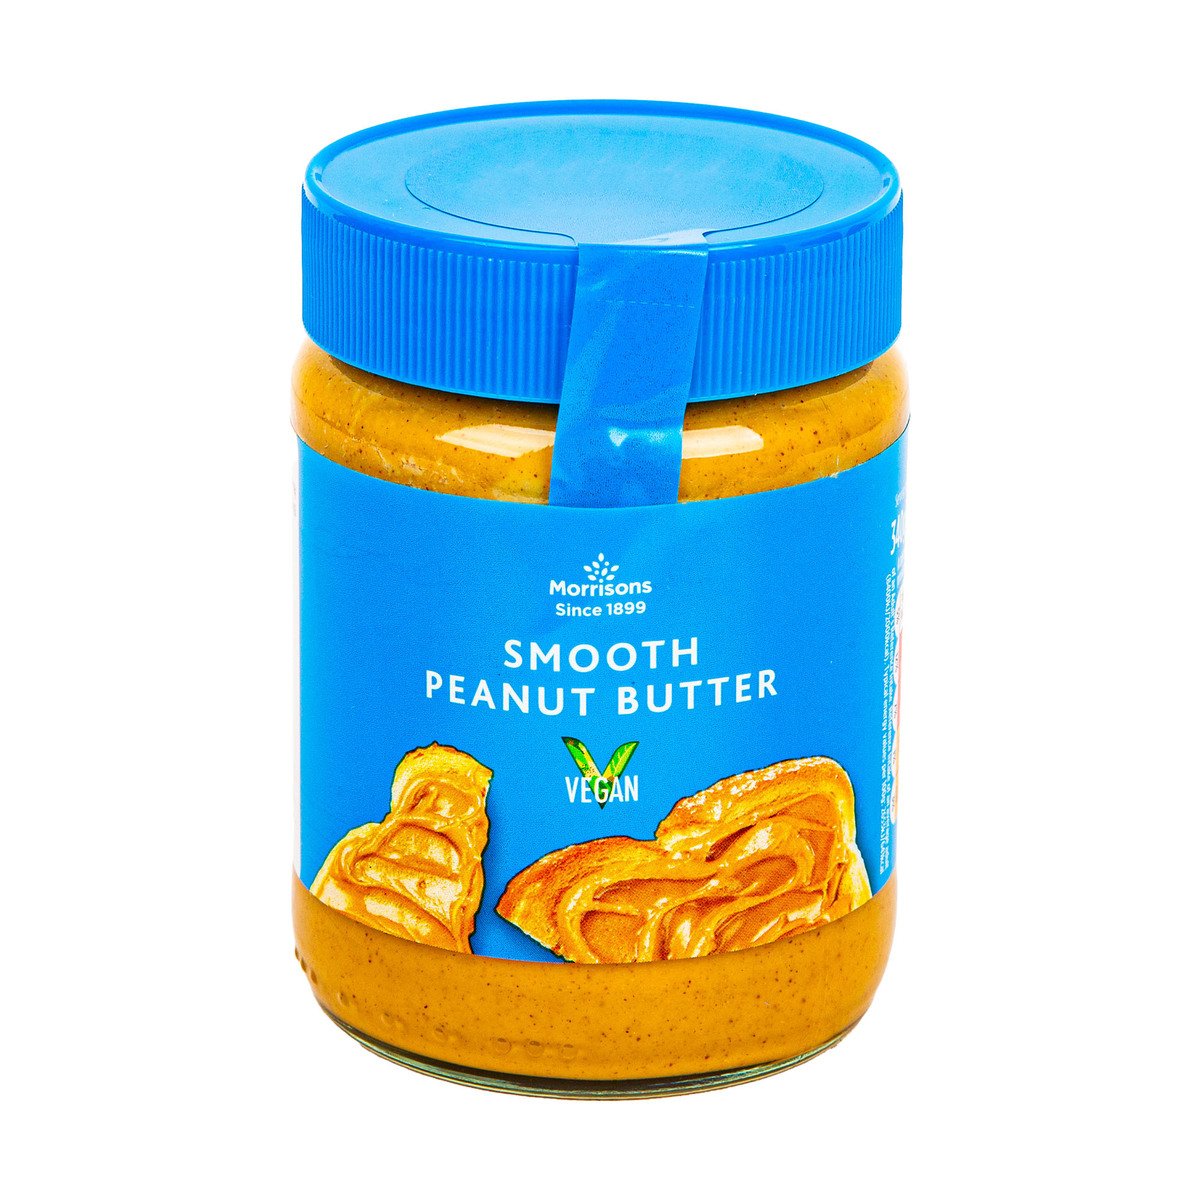 Morrisons Smooth Peanut Butter 340 g